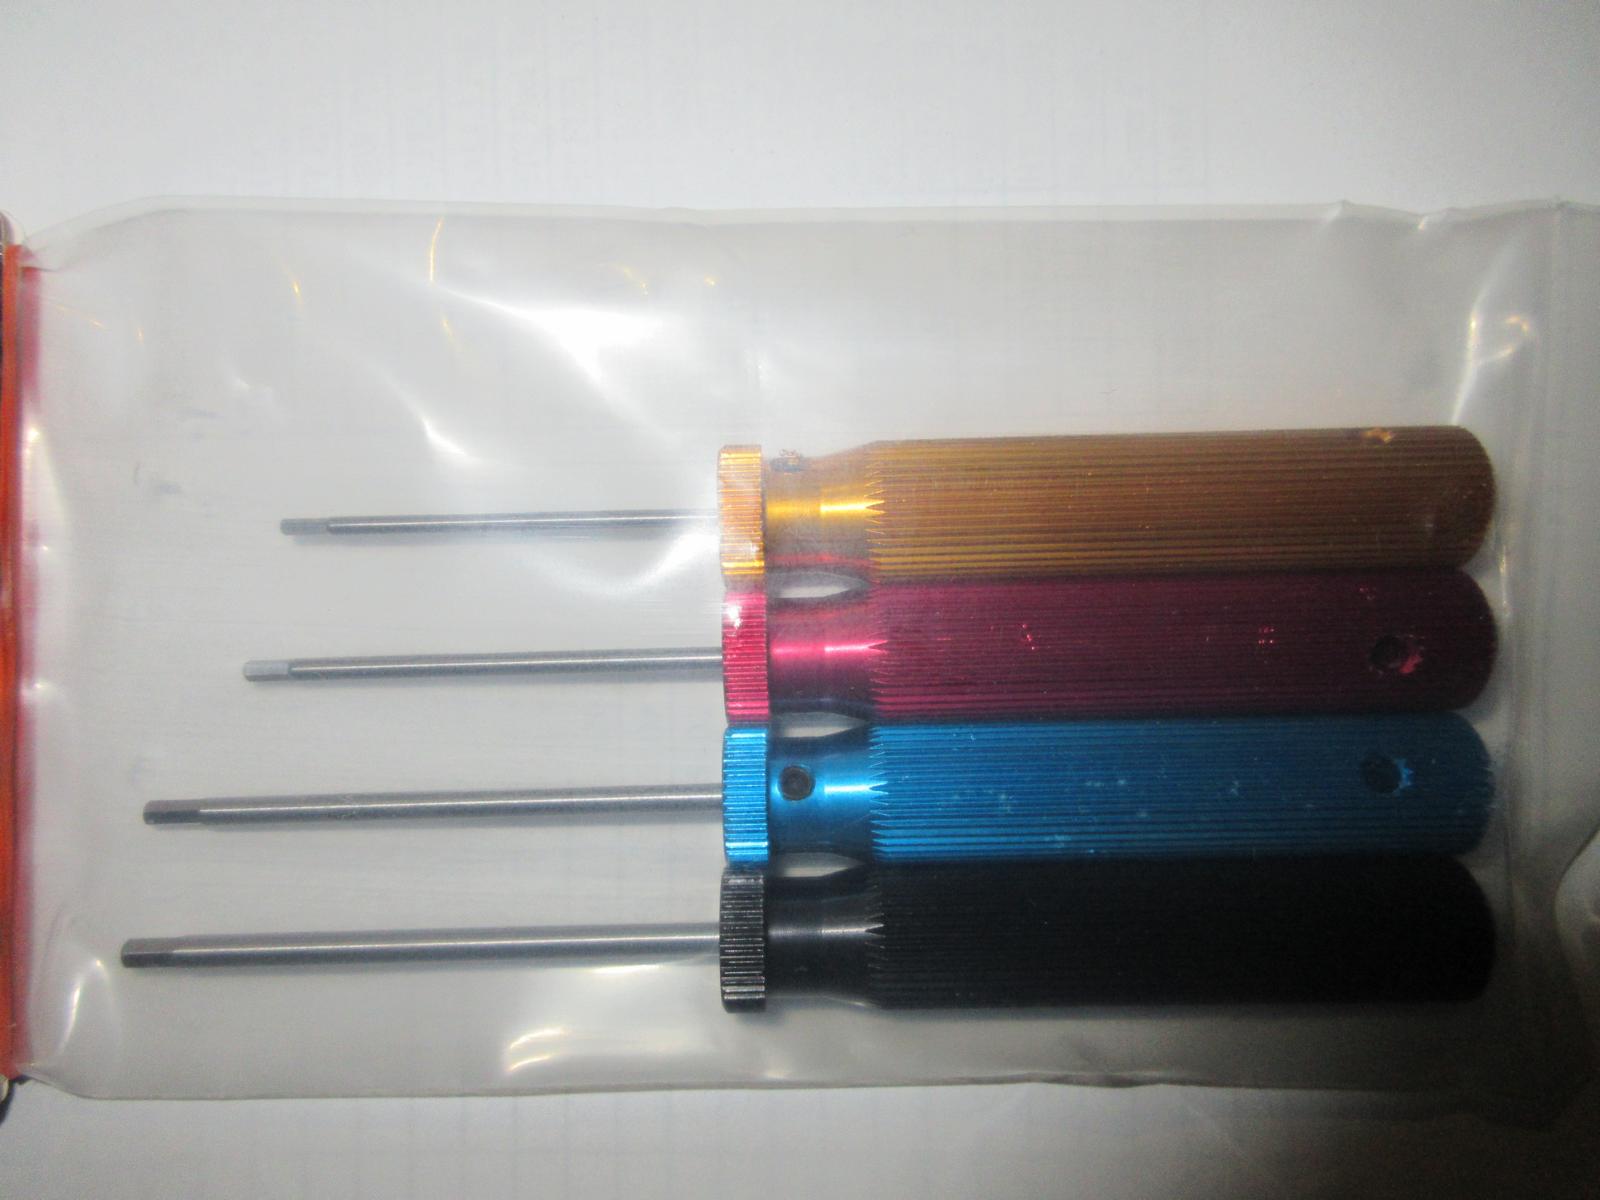 NEW TYPE HEX DRIVER SET (1.5mm, 2mm, 2.5mm, 3mm)